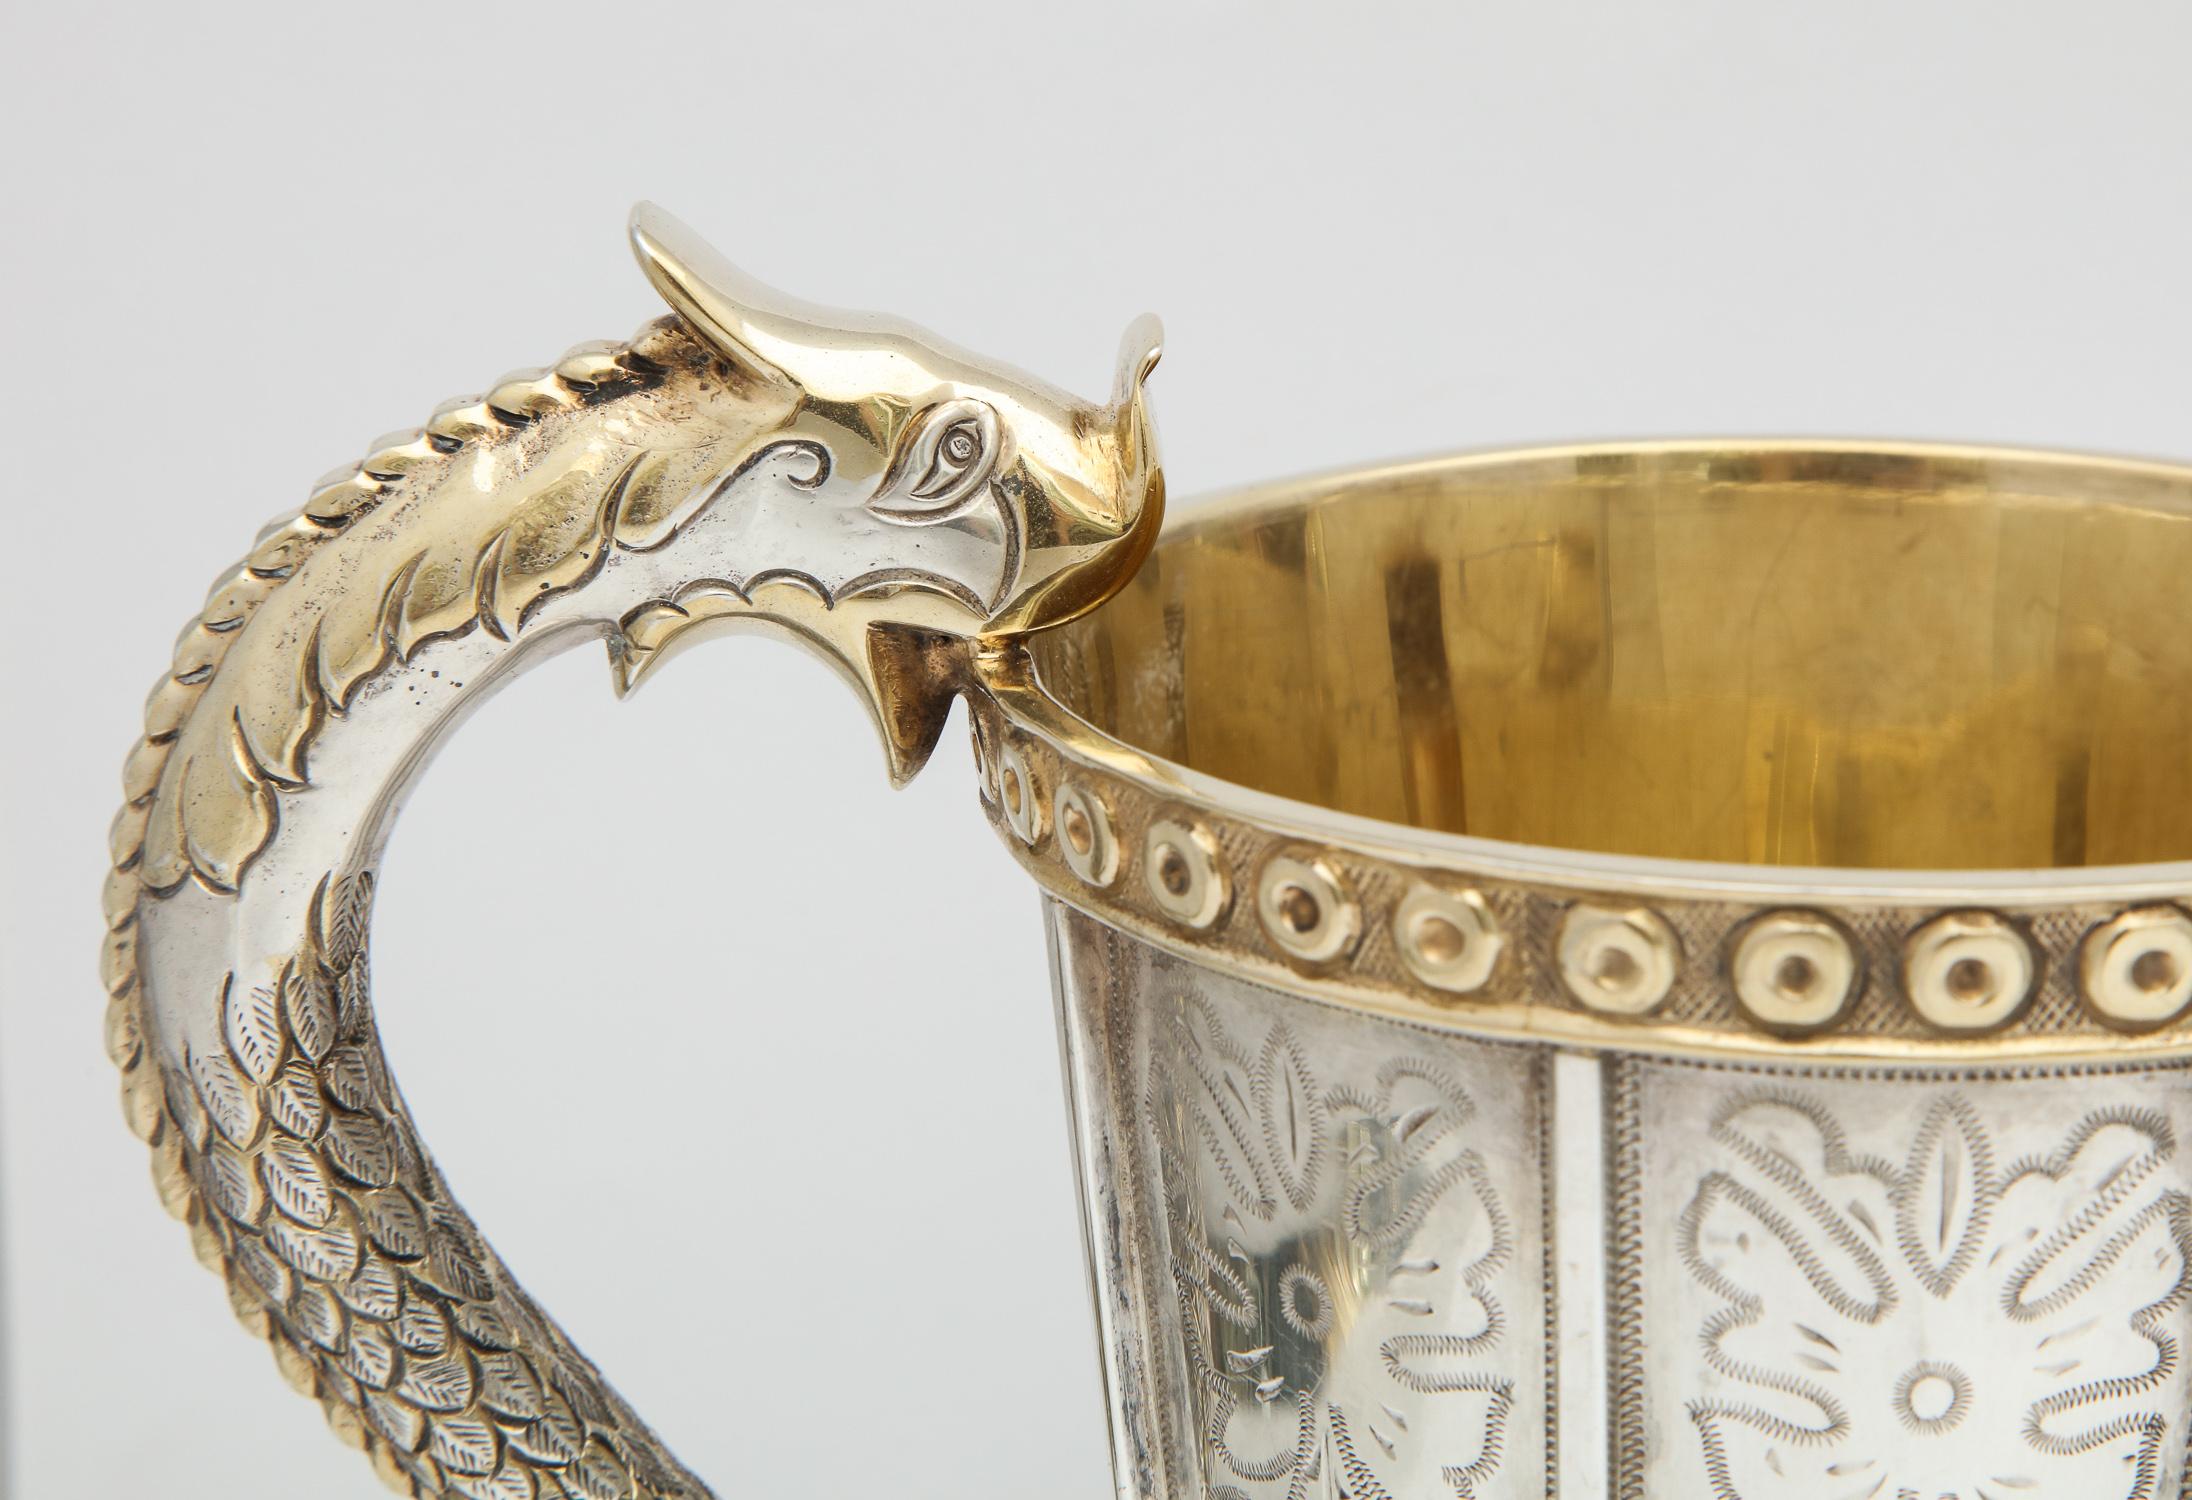 Quetzalcoatl-Inspired Sterling Silver Gilt Pitcher by Tane 7